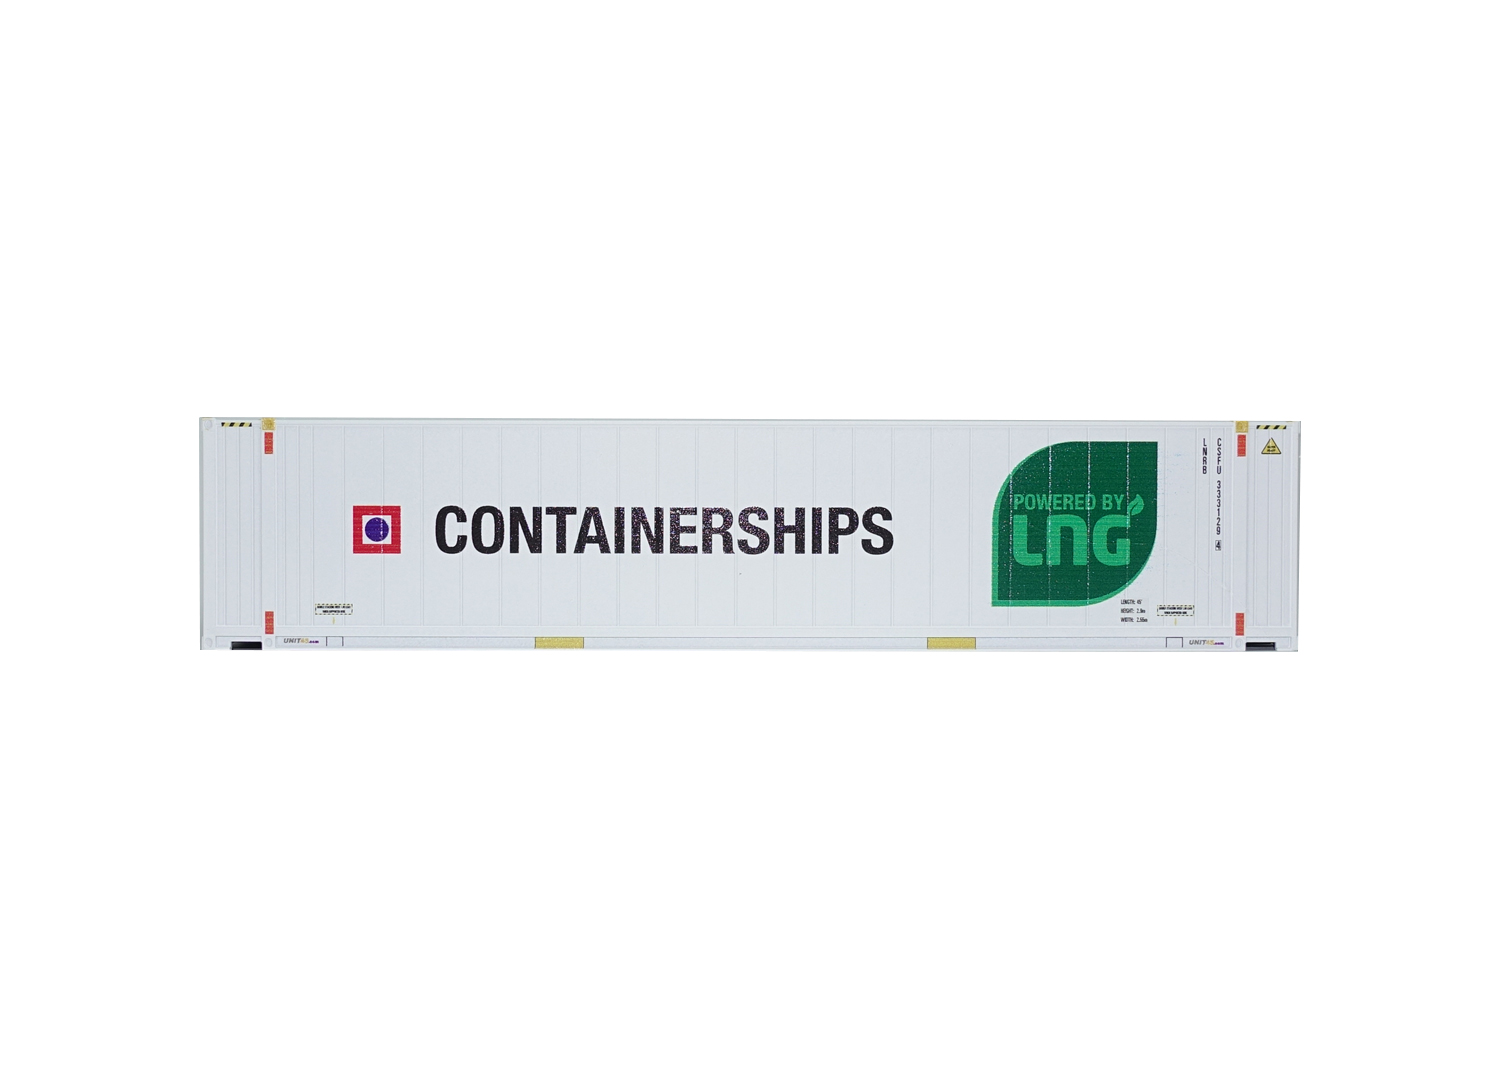 KombiModell 89519.01 Container Containerships LNG Ct 45 SoSe 